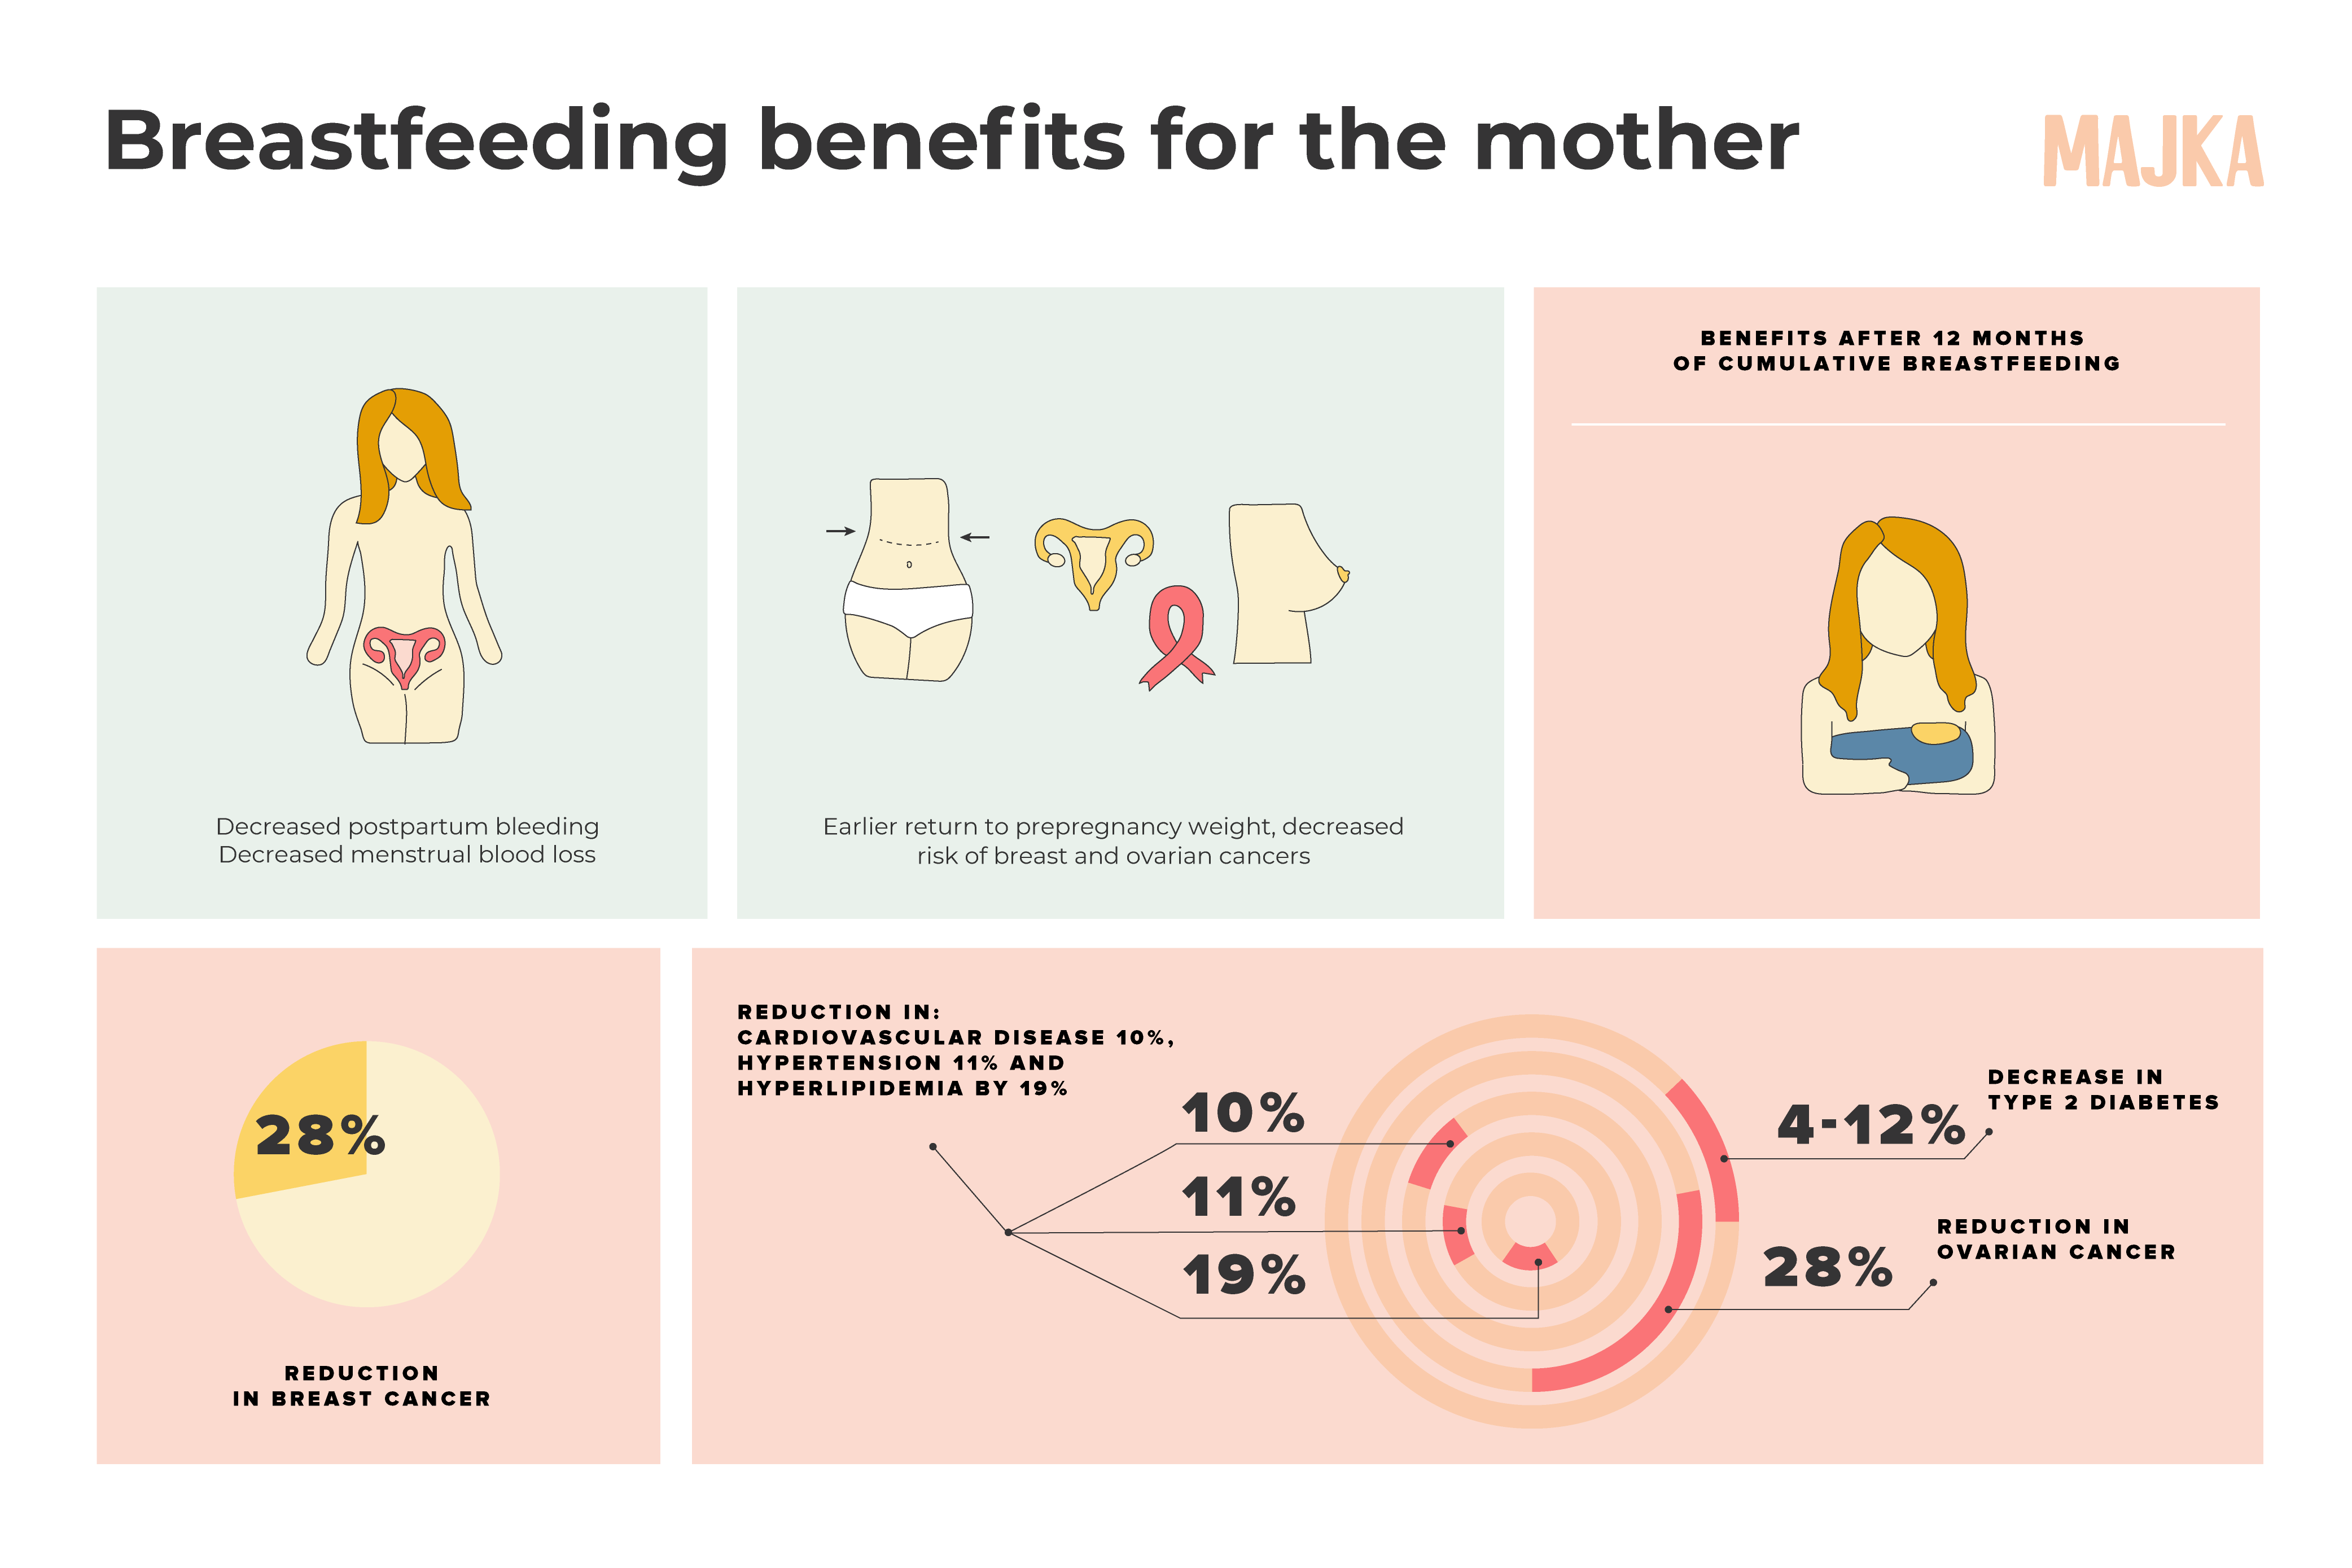 Breastfeeding Benefits for the Mother